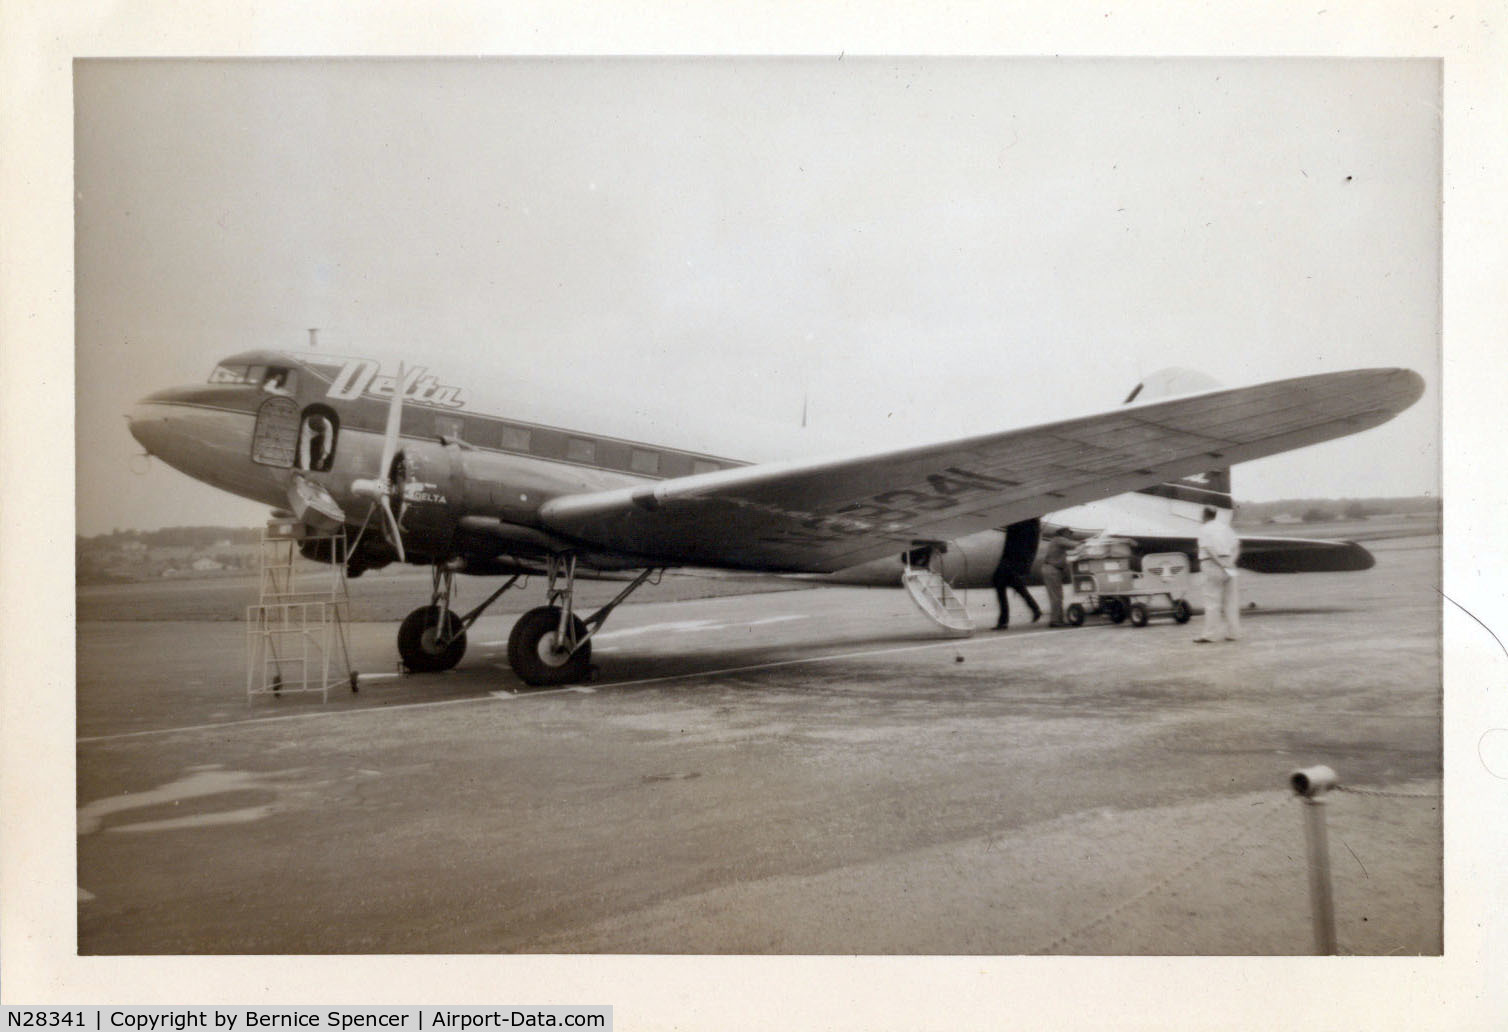 N28341, 1940 Douglas DC-3-G202A C/N 3278, Probably taken at Greenville, SC at some point in the late 40s or early 50s